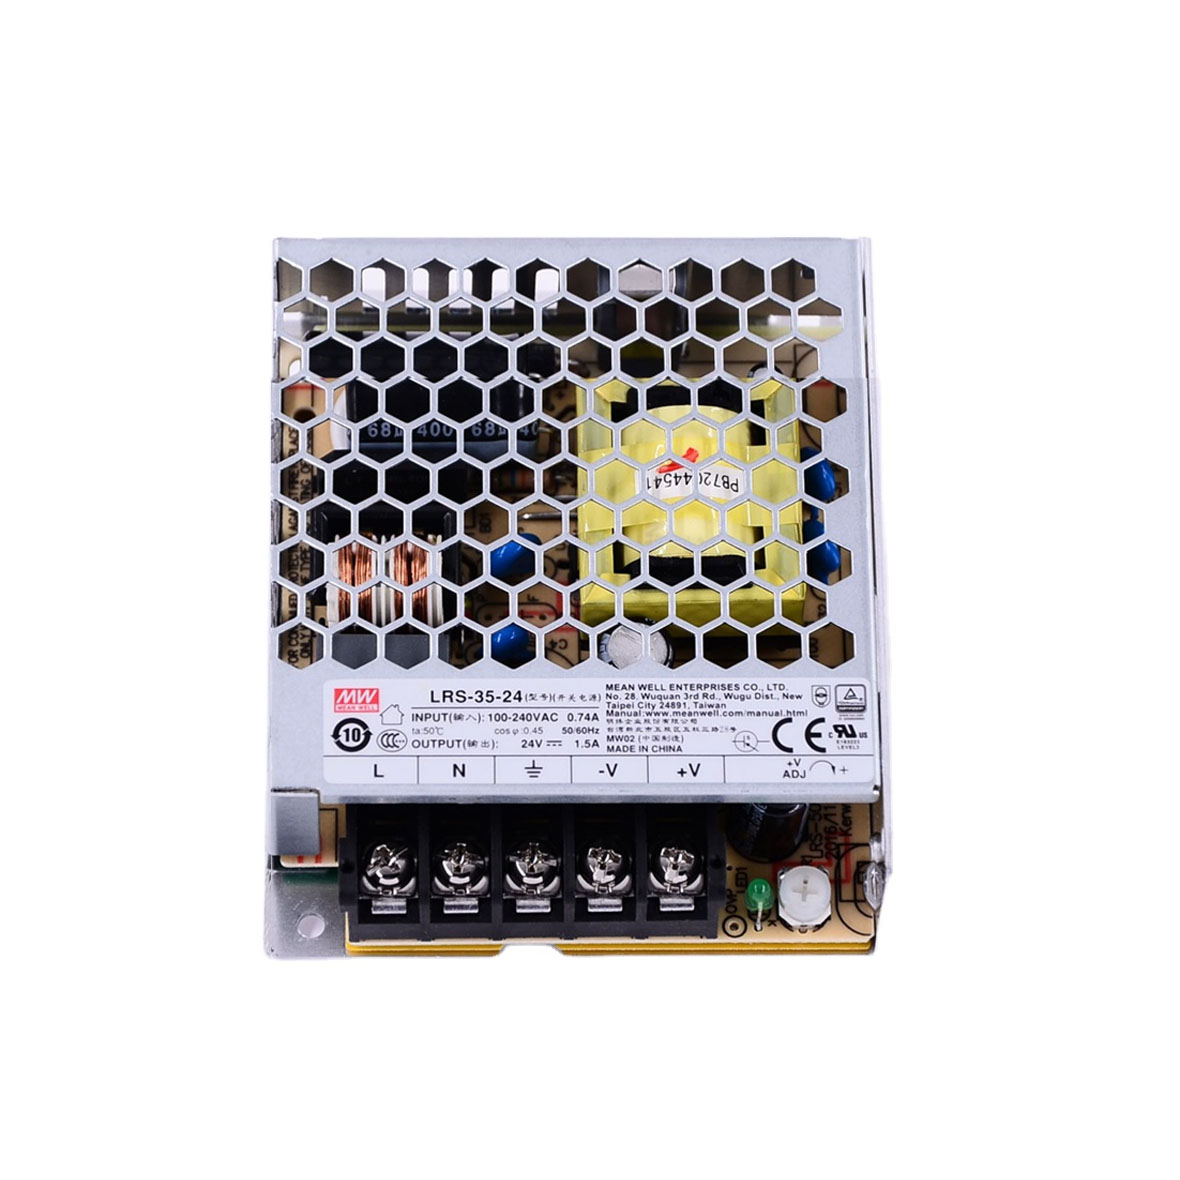 MEAN WELL original LRS-100-48 48V 2.3A meanwell LRS-100 48V 110.4W Single  Output Switching Power Supply